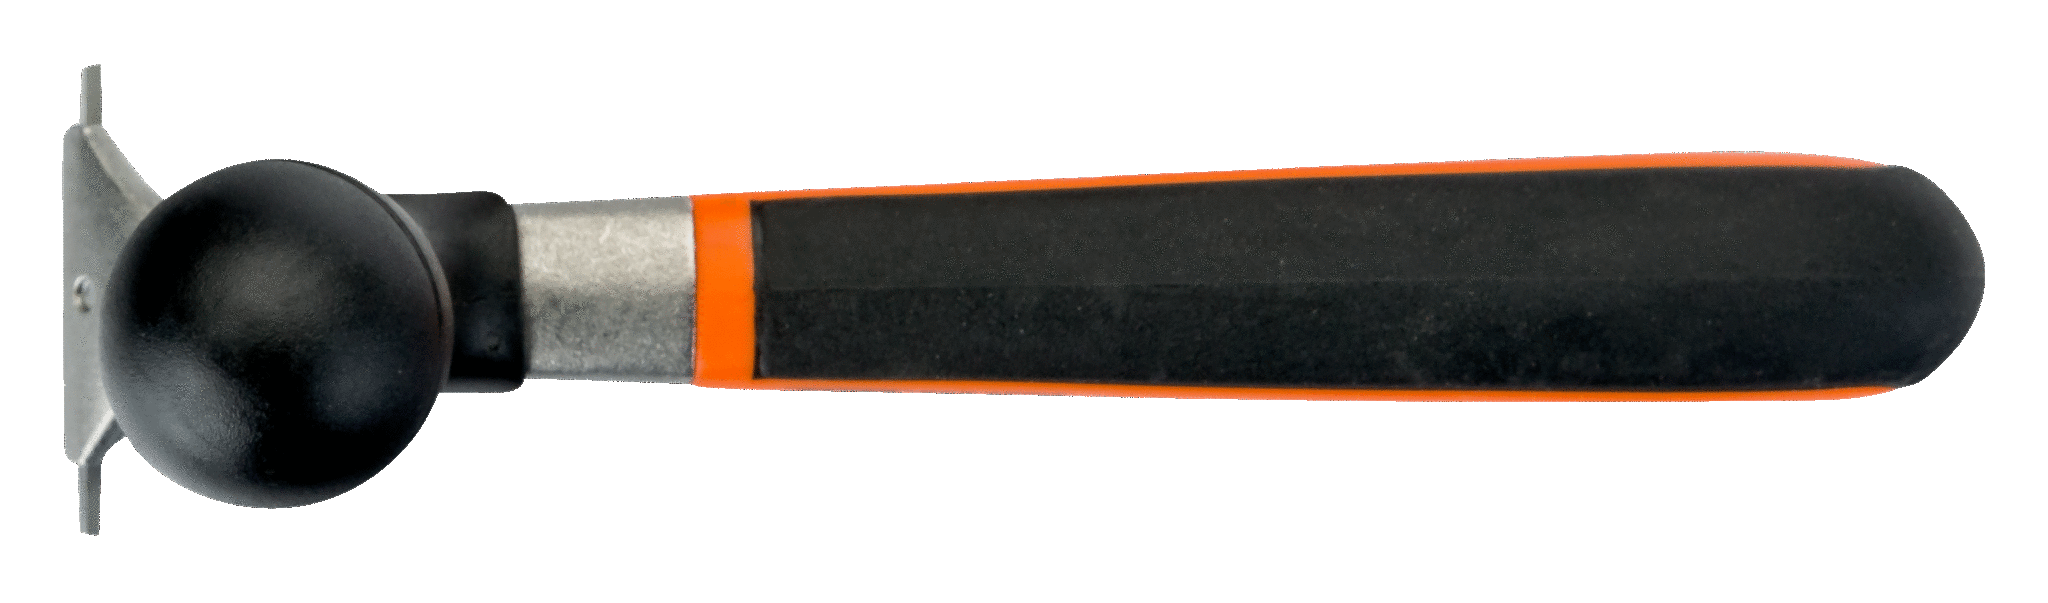 Bahco 625 Paint Scrapers, with Dual-Component Handle